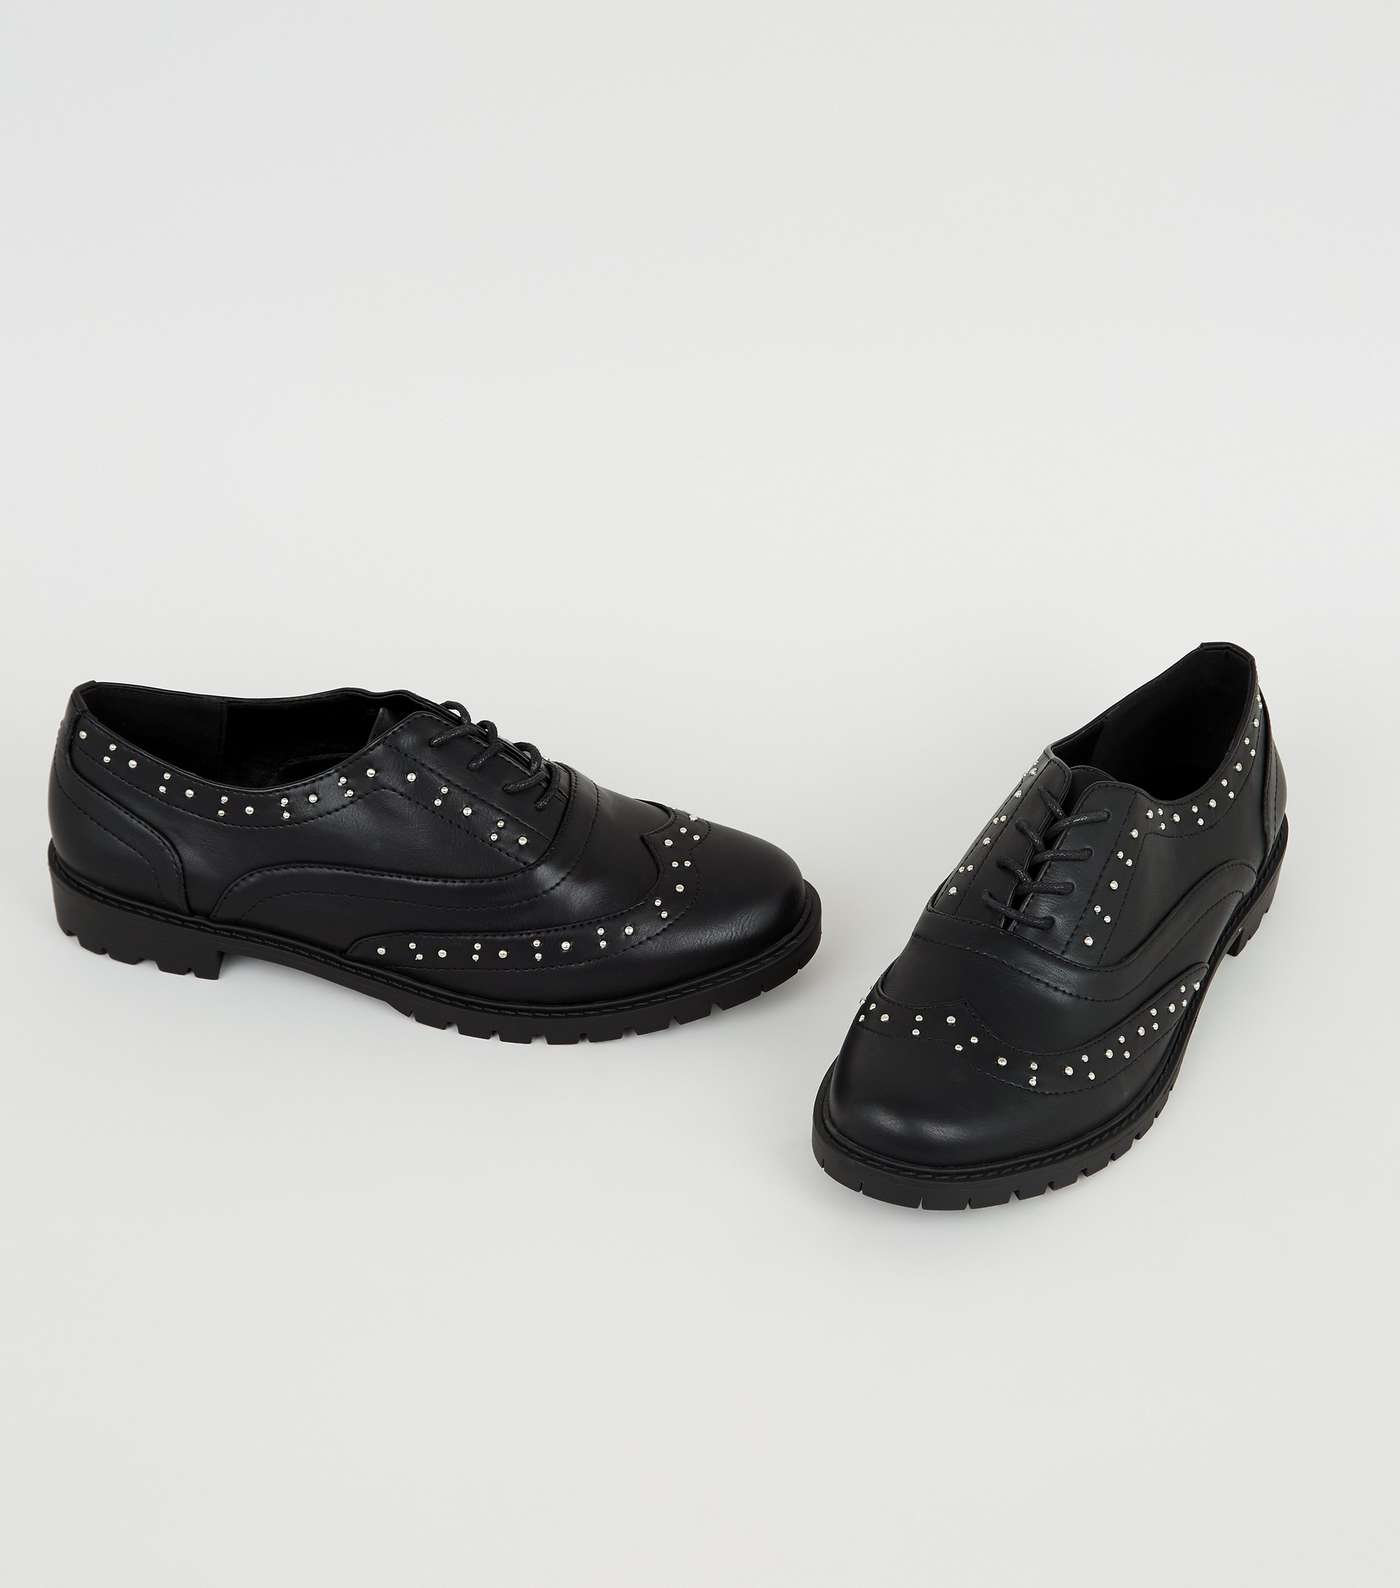 Wide Fit Black Leather-Look Studded Lace Up Shoes Image 3